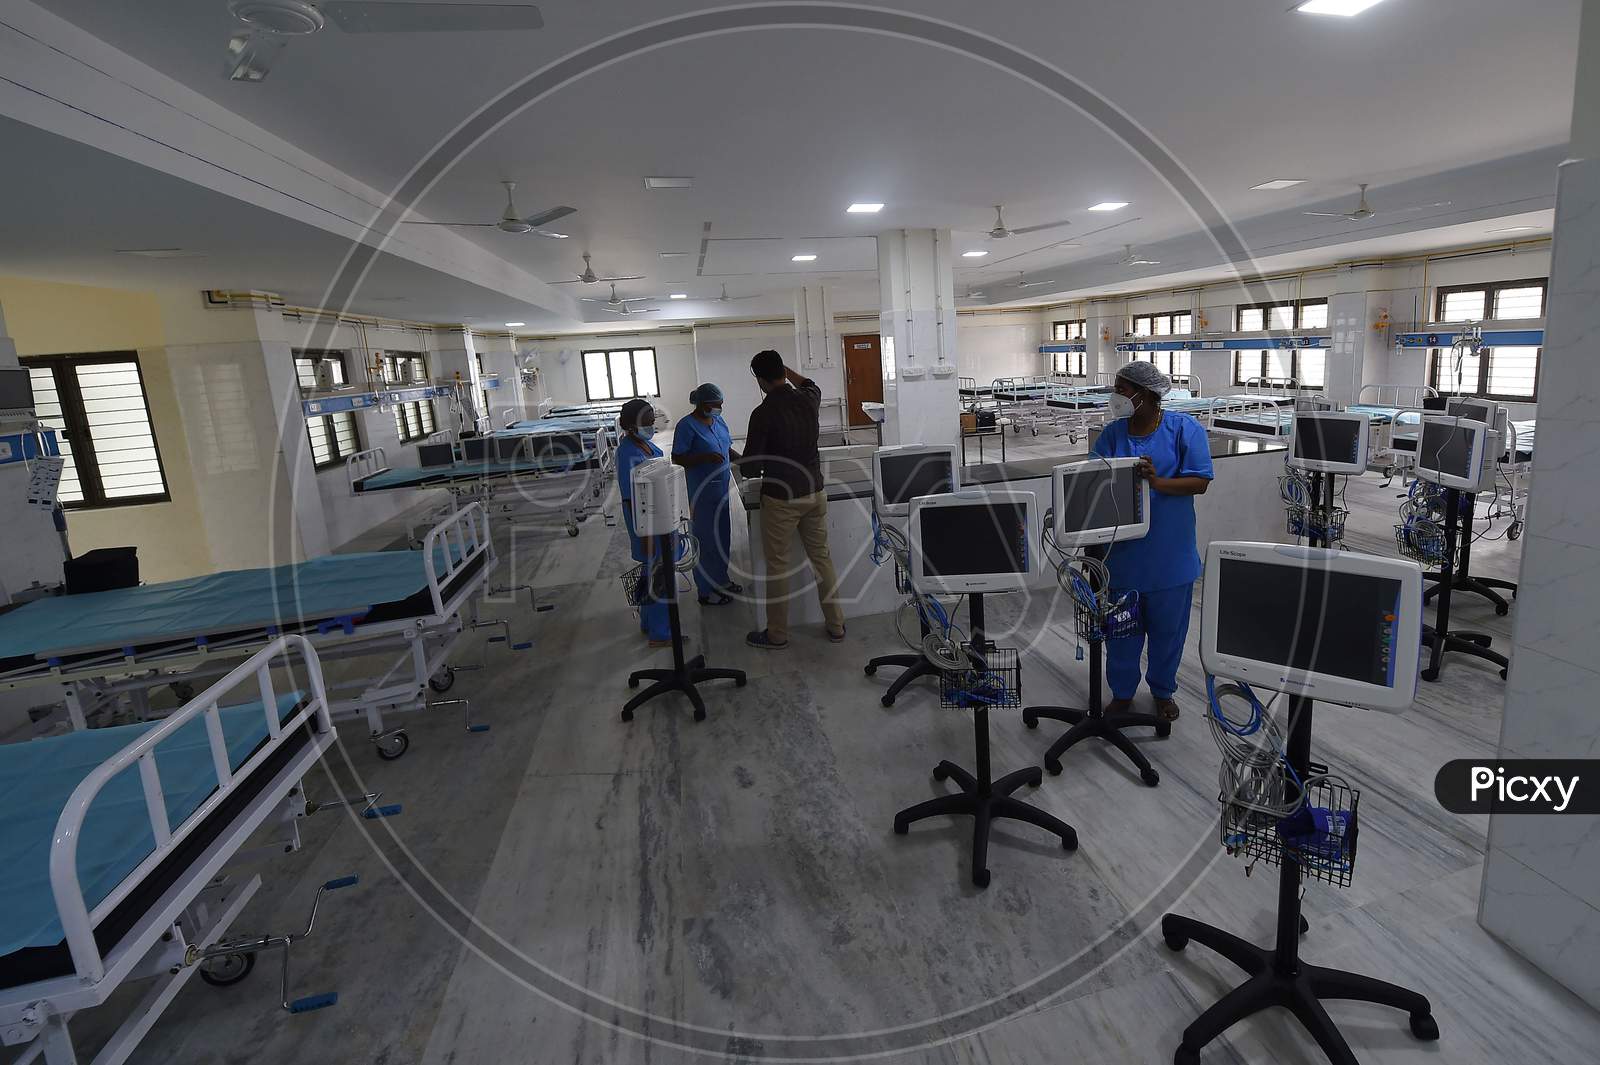 Health care workers check medical equipment in a building which belonged to the National Institute of Ageing that has been converted into a dedicated Covid-19 Care Centre in Chennai, Tamil Nadu on July 07, 2020